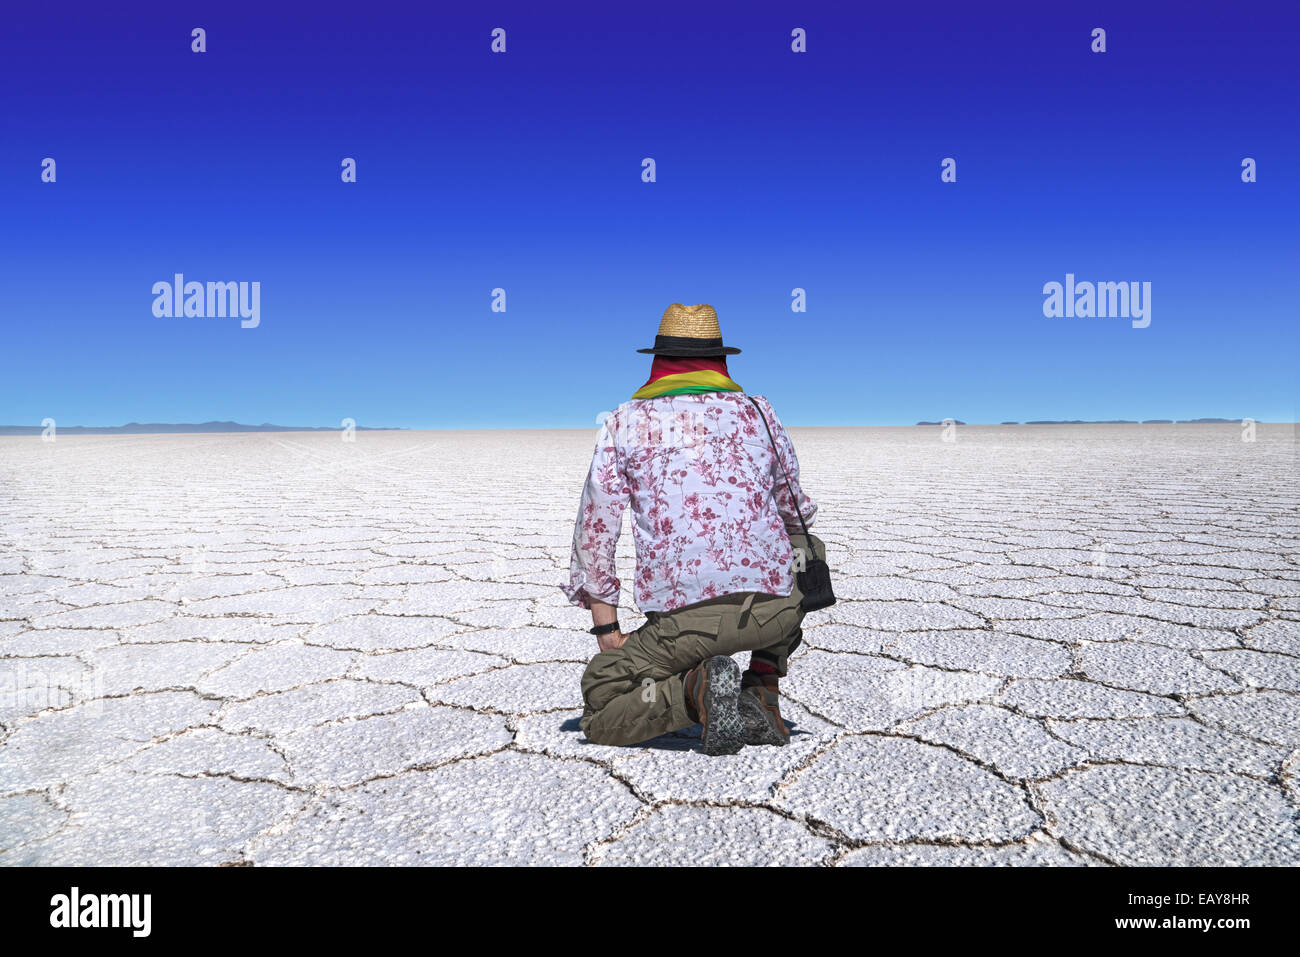 Traveler with straw hat and scarf in bolivian national colors kneels at the desert of Uyuni, Bolivia and looks at the wideness o Stock Photo